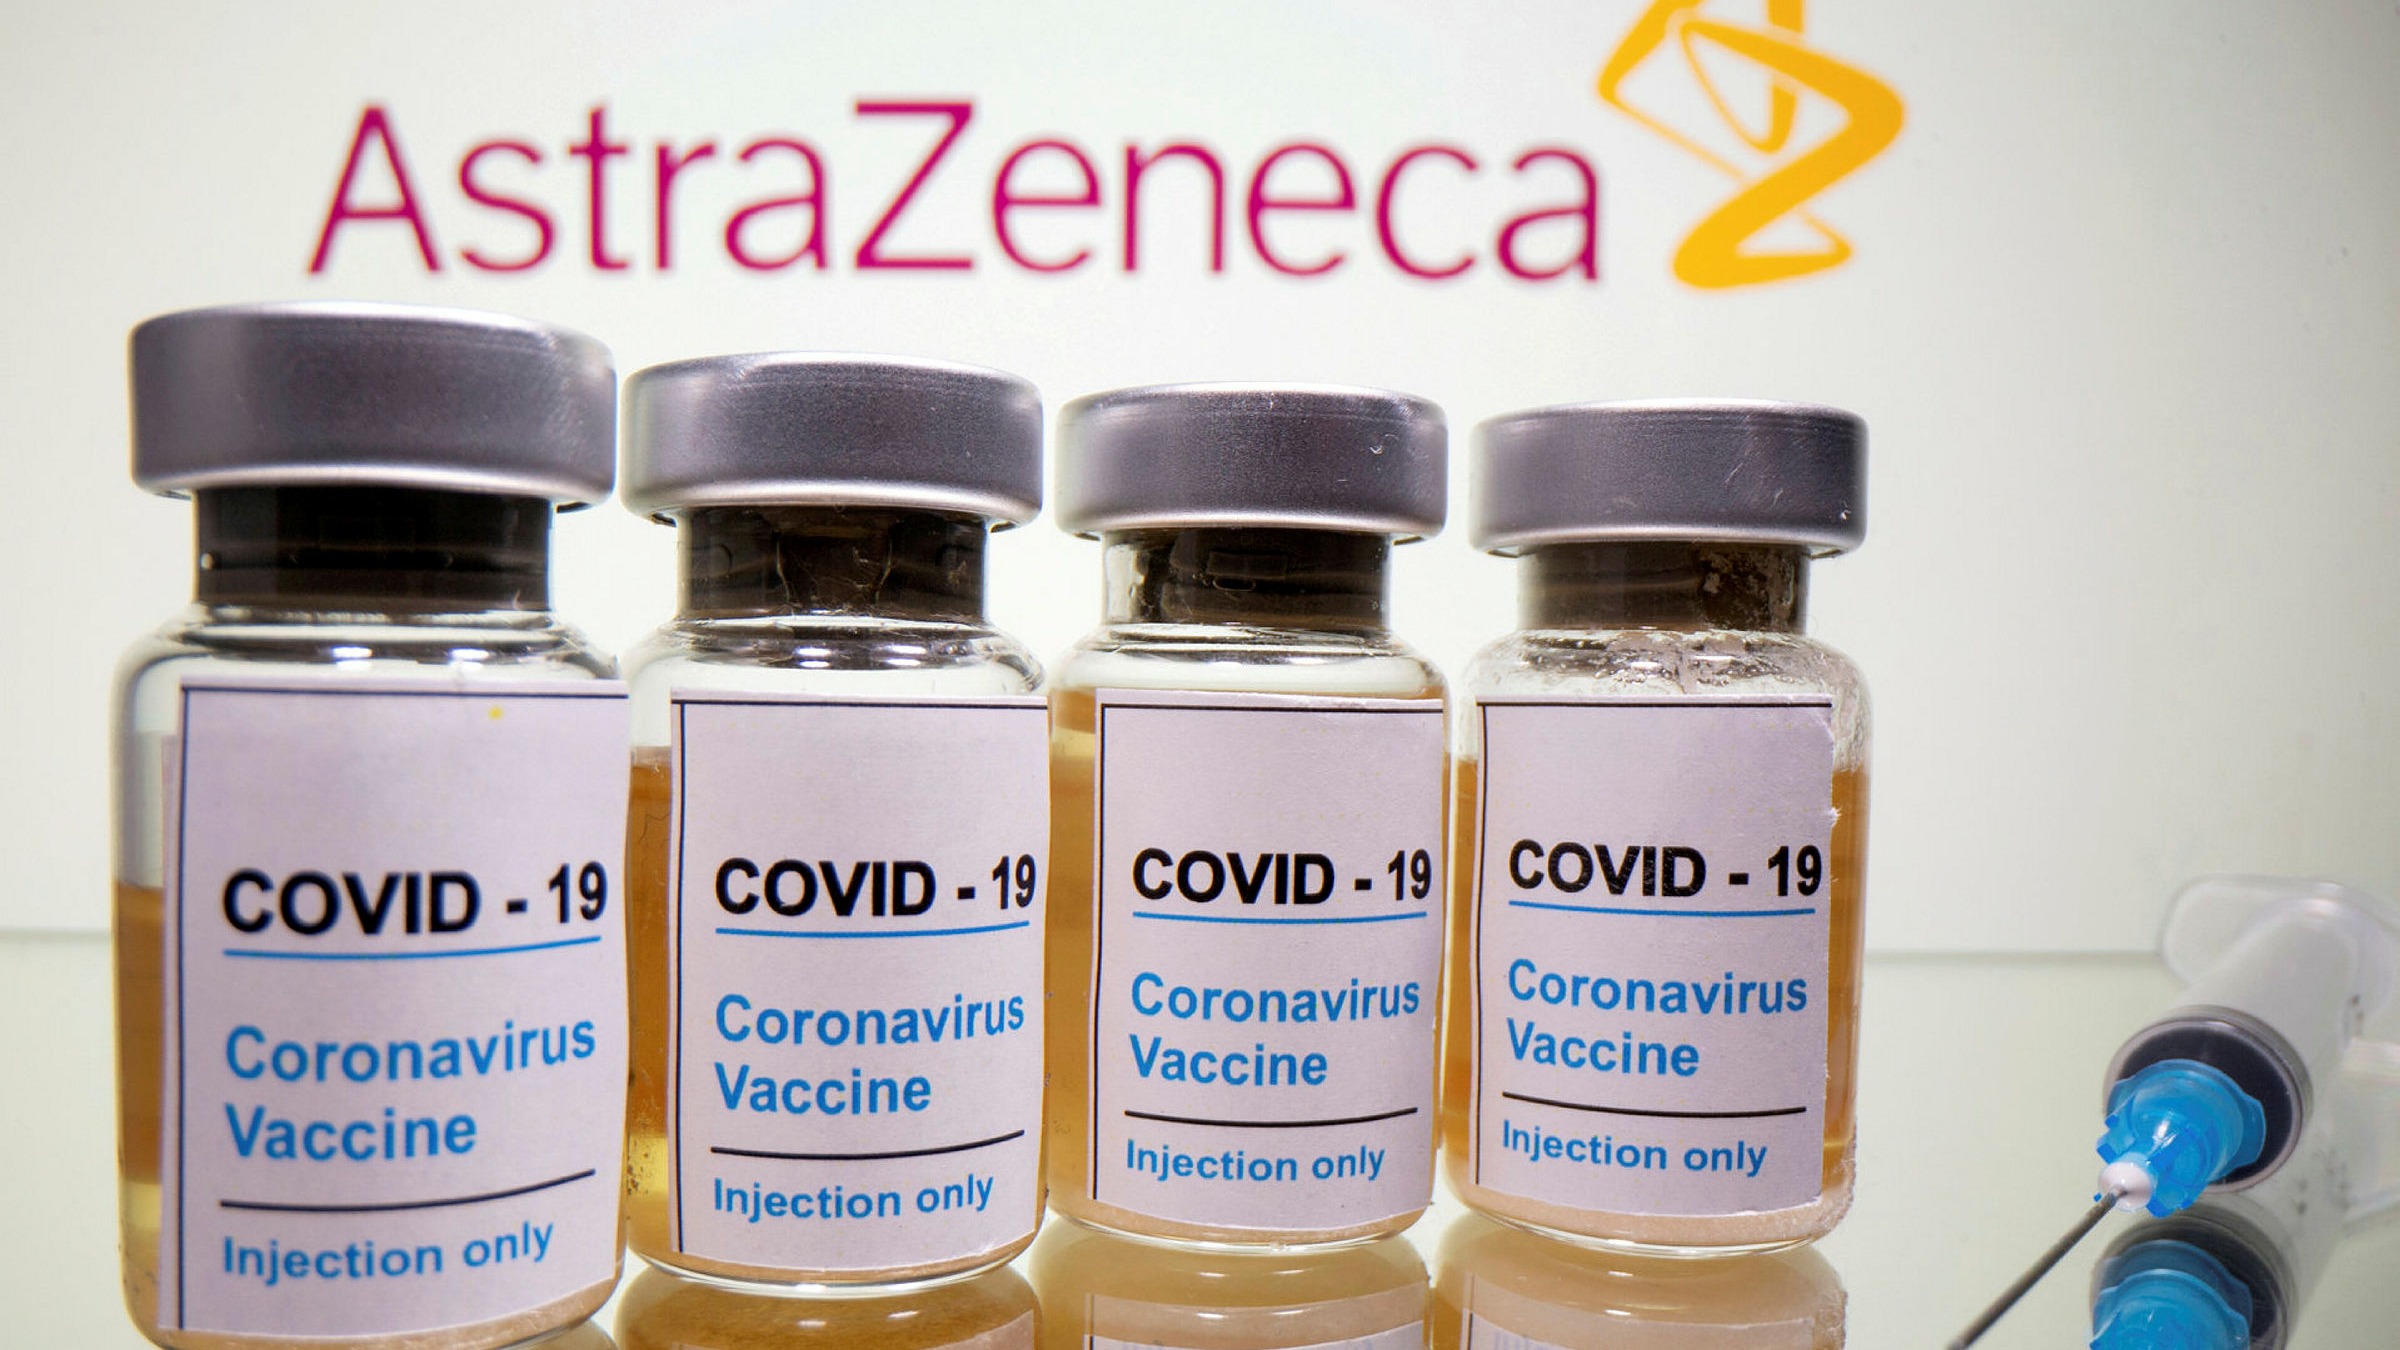 Why is the AstraZeneca vaccine not recommended for over 65s?